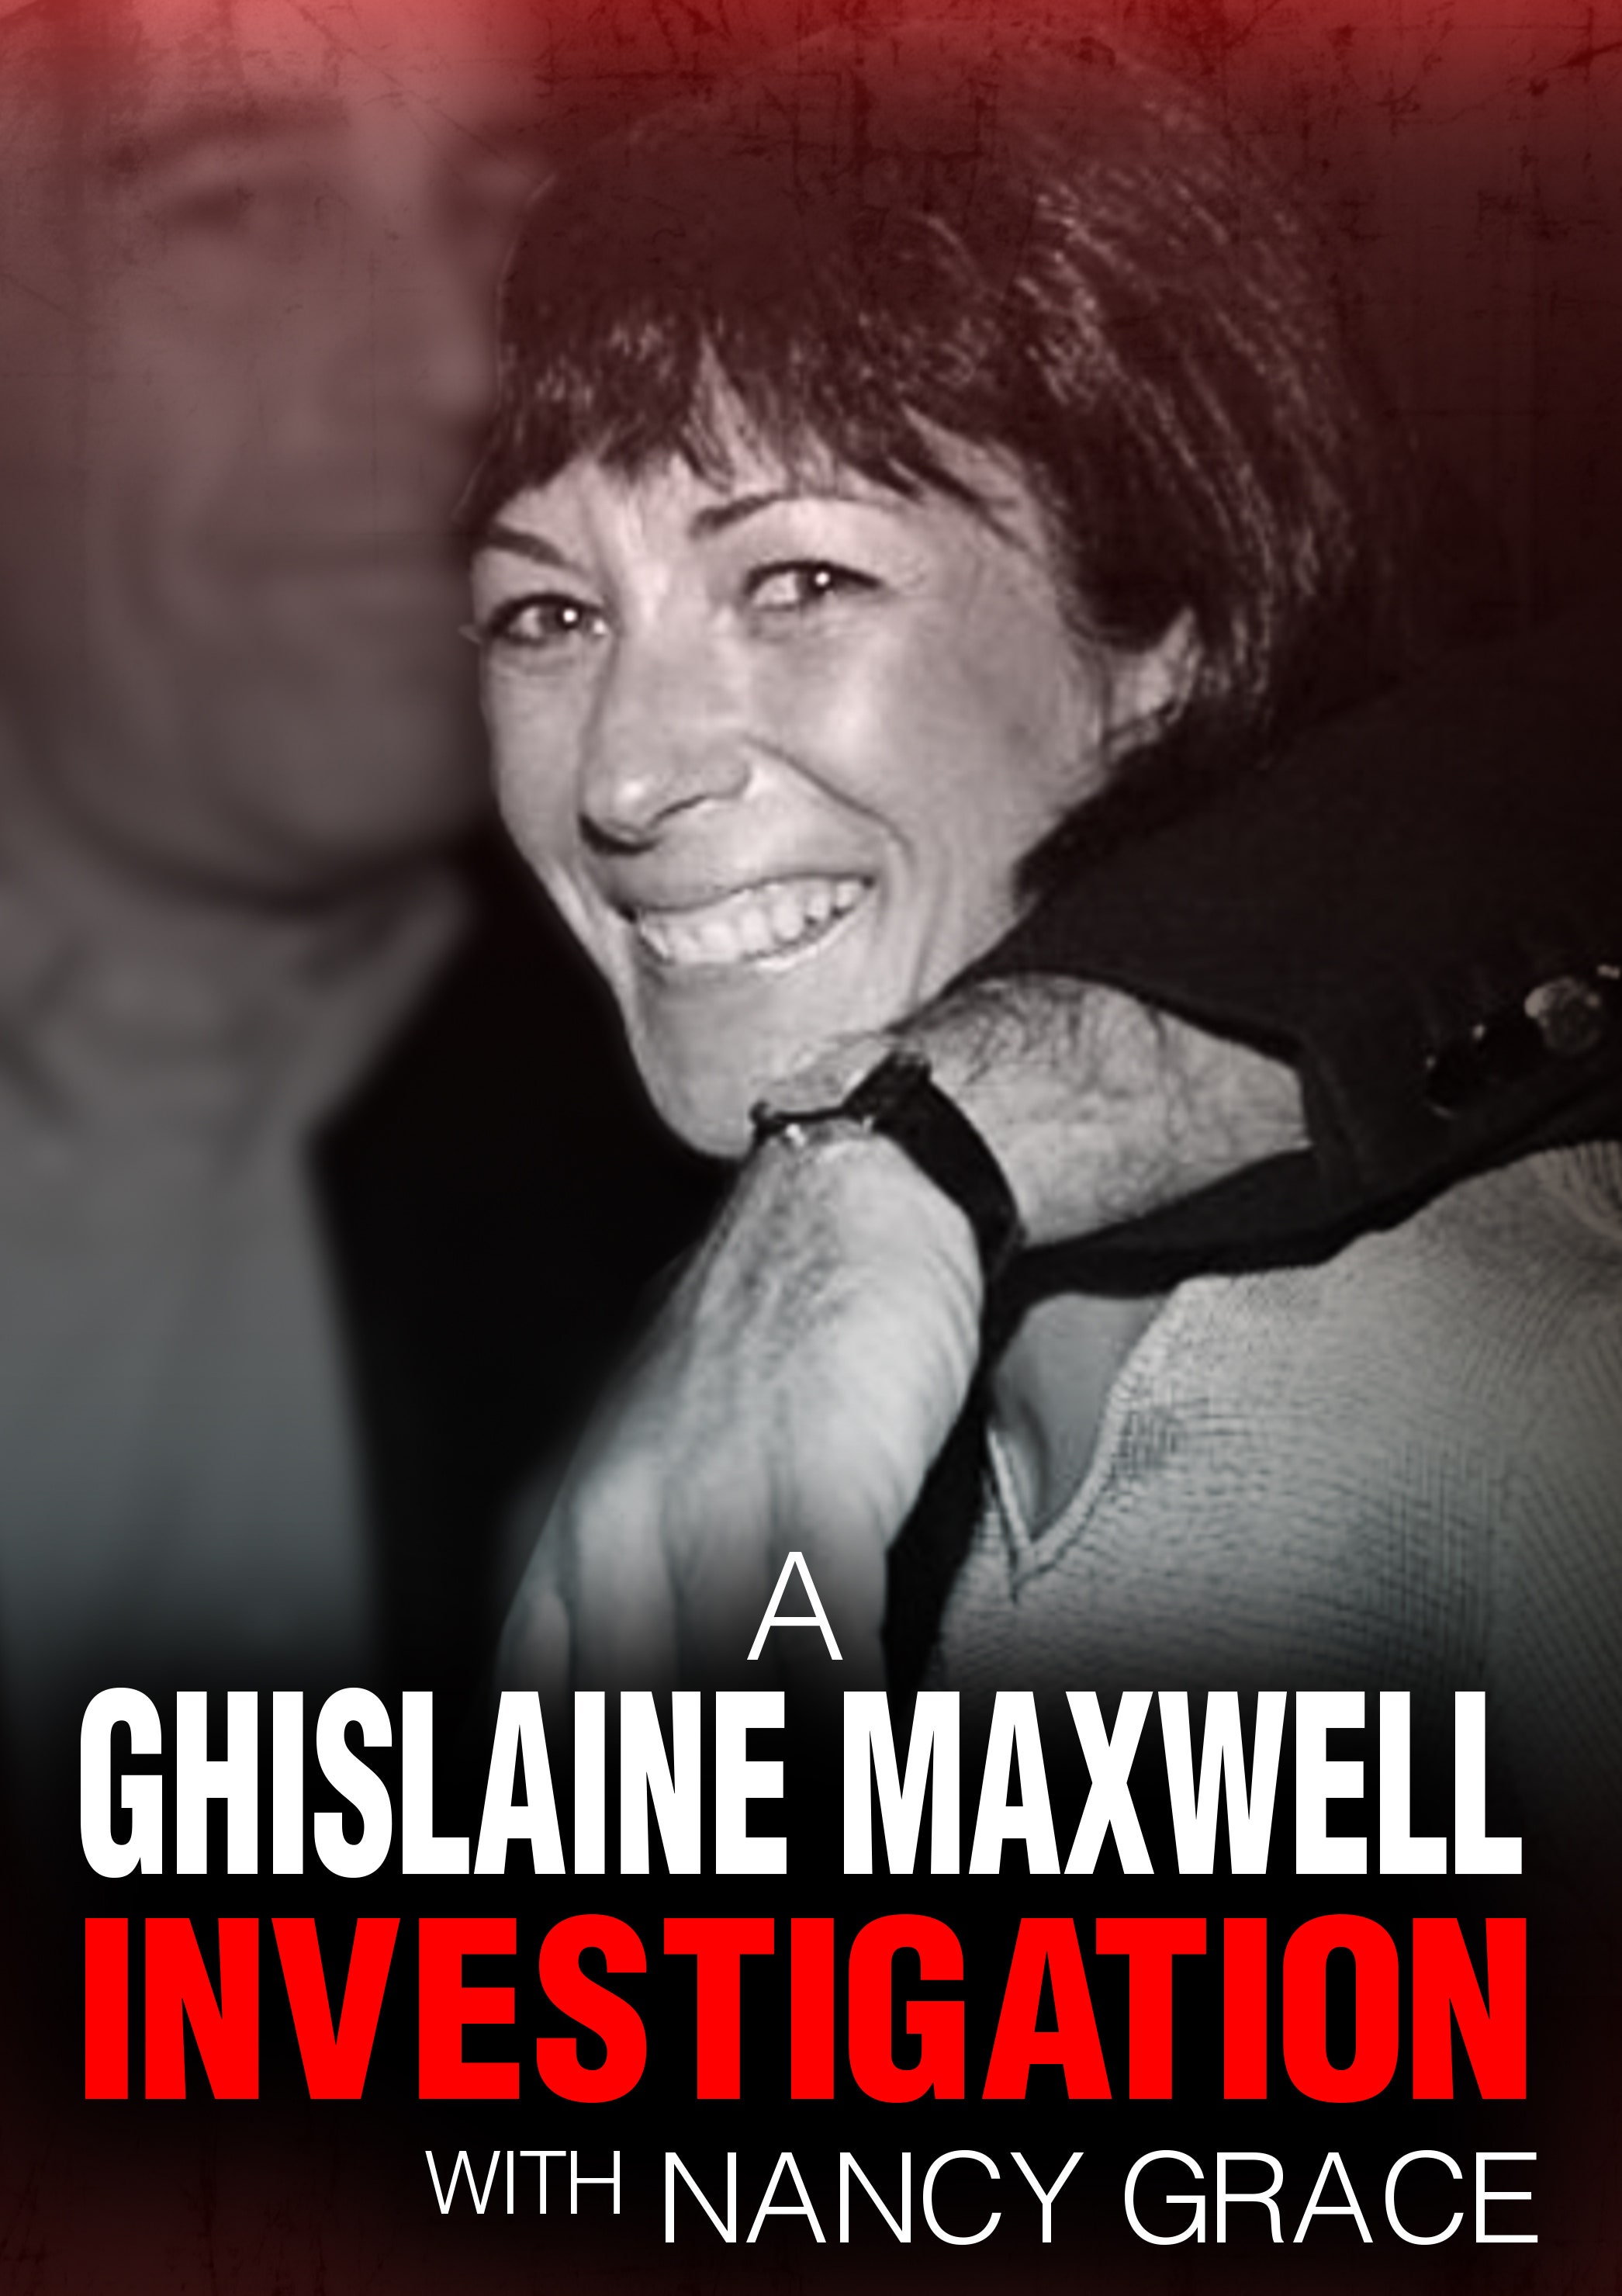 A Ghislaine Maxwell Investigation with Nancy Grace dcg-mark-poster